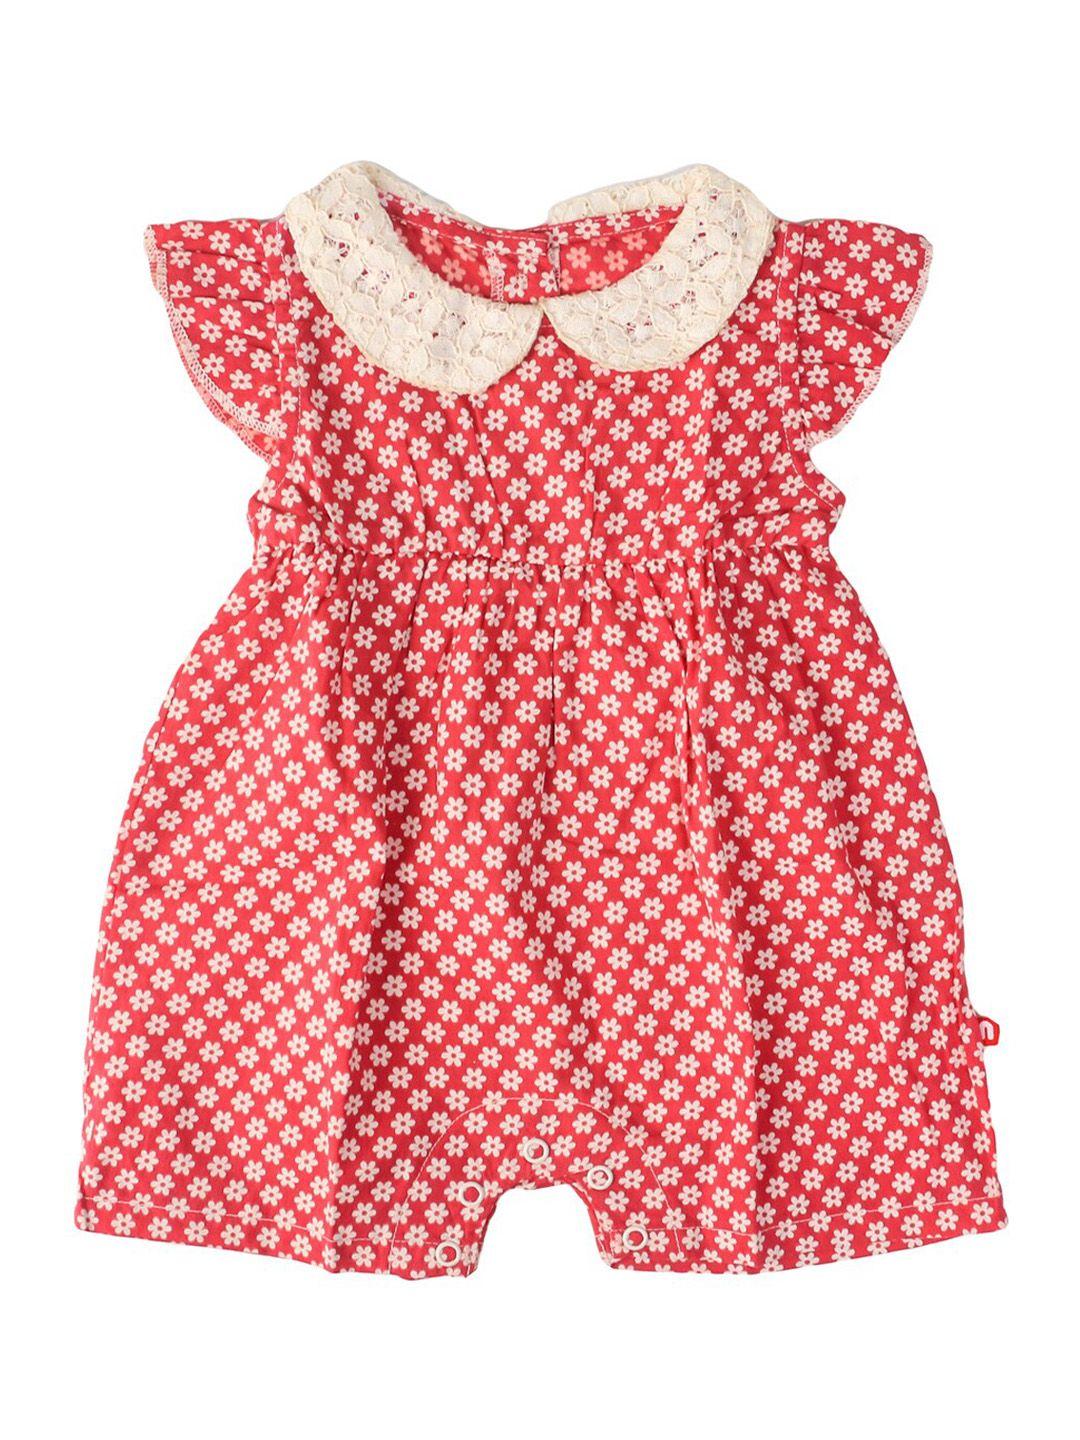 nino-bambino-infant-girls-red-&-off-white-printed-pure-organic-cotton-rompers